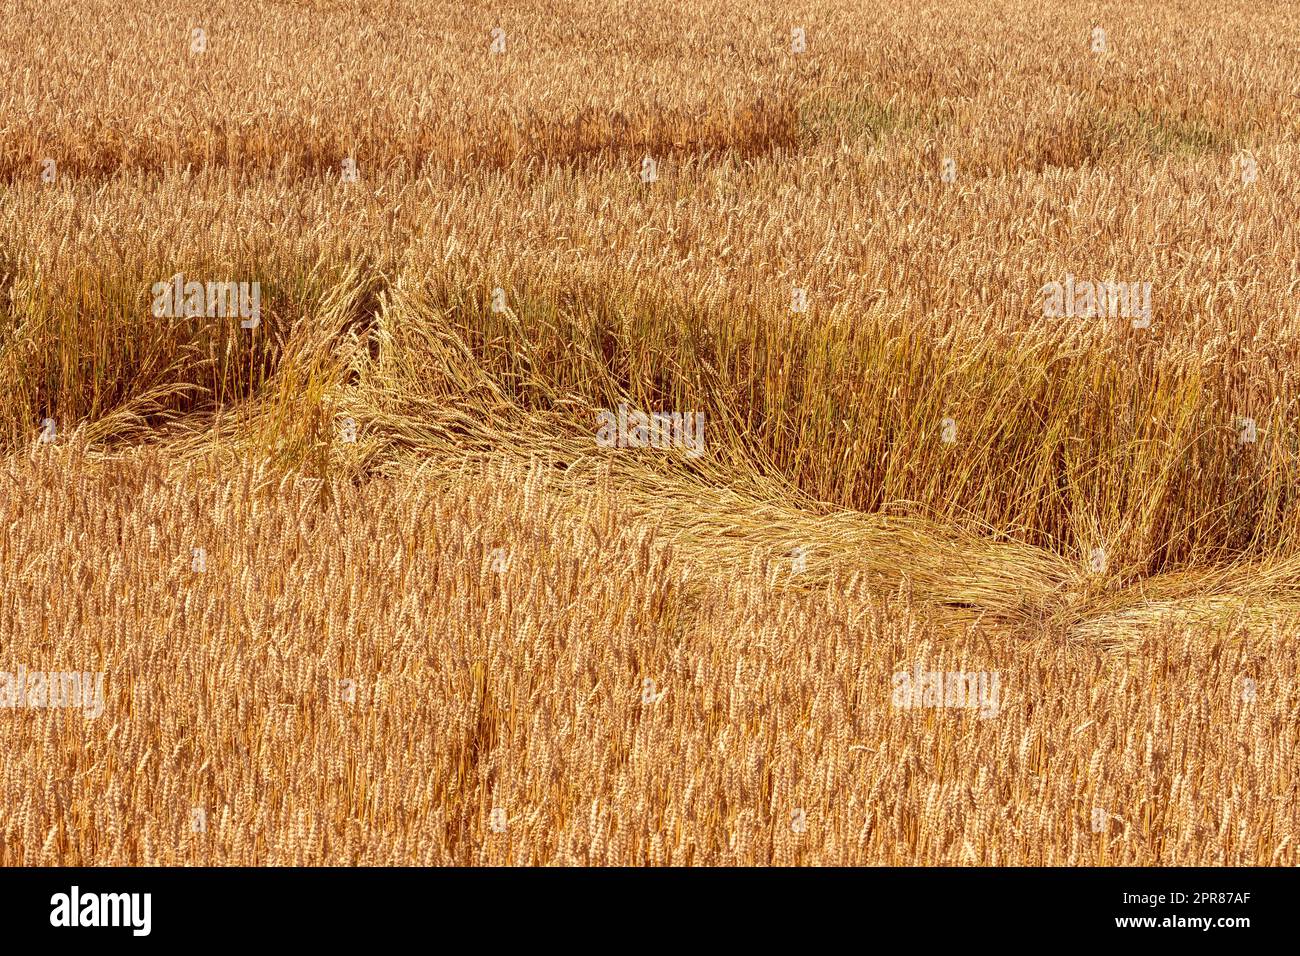 Wind and rain damage and losses in agriculture Stock Photo